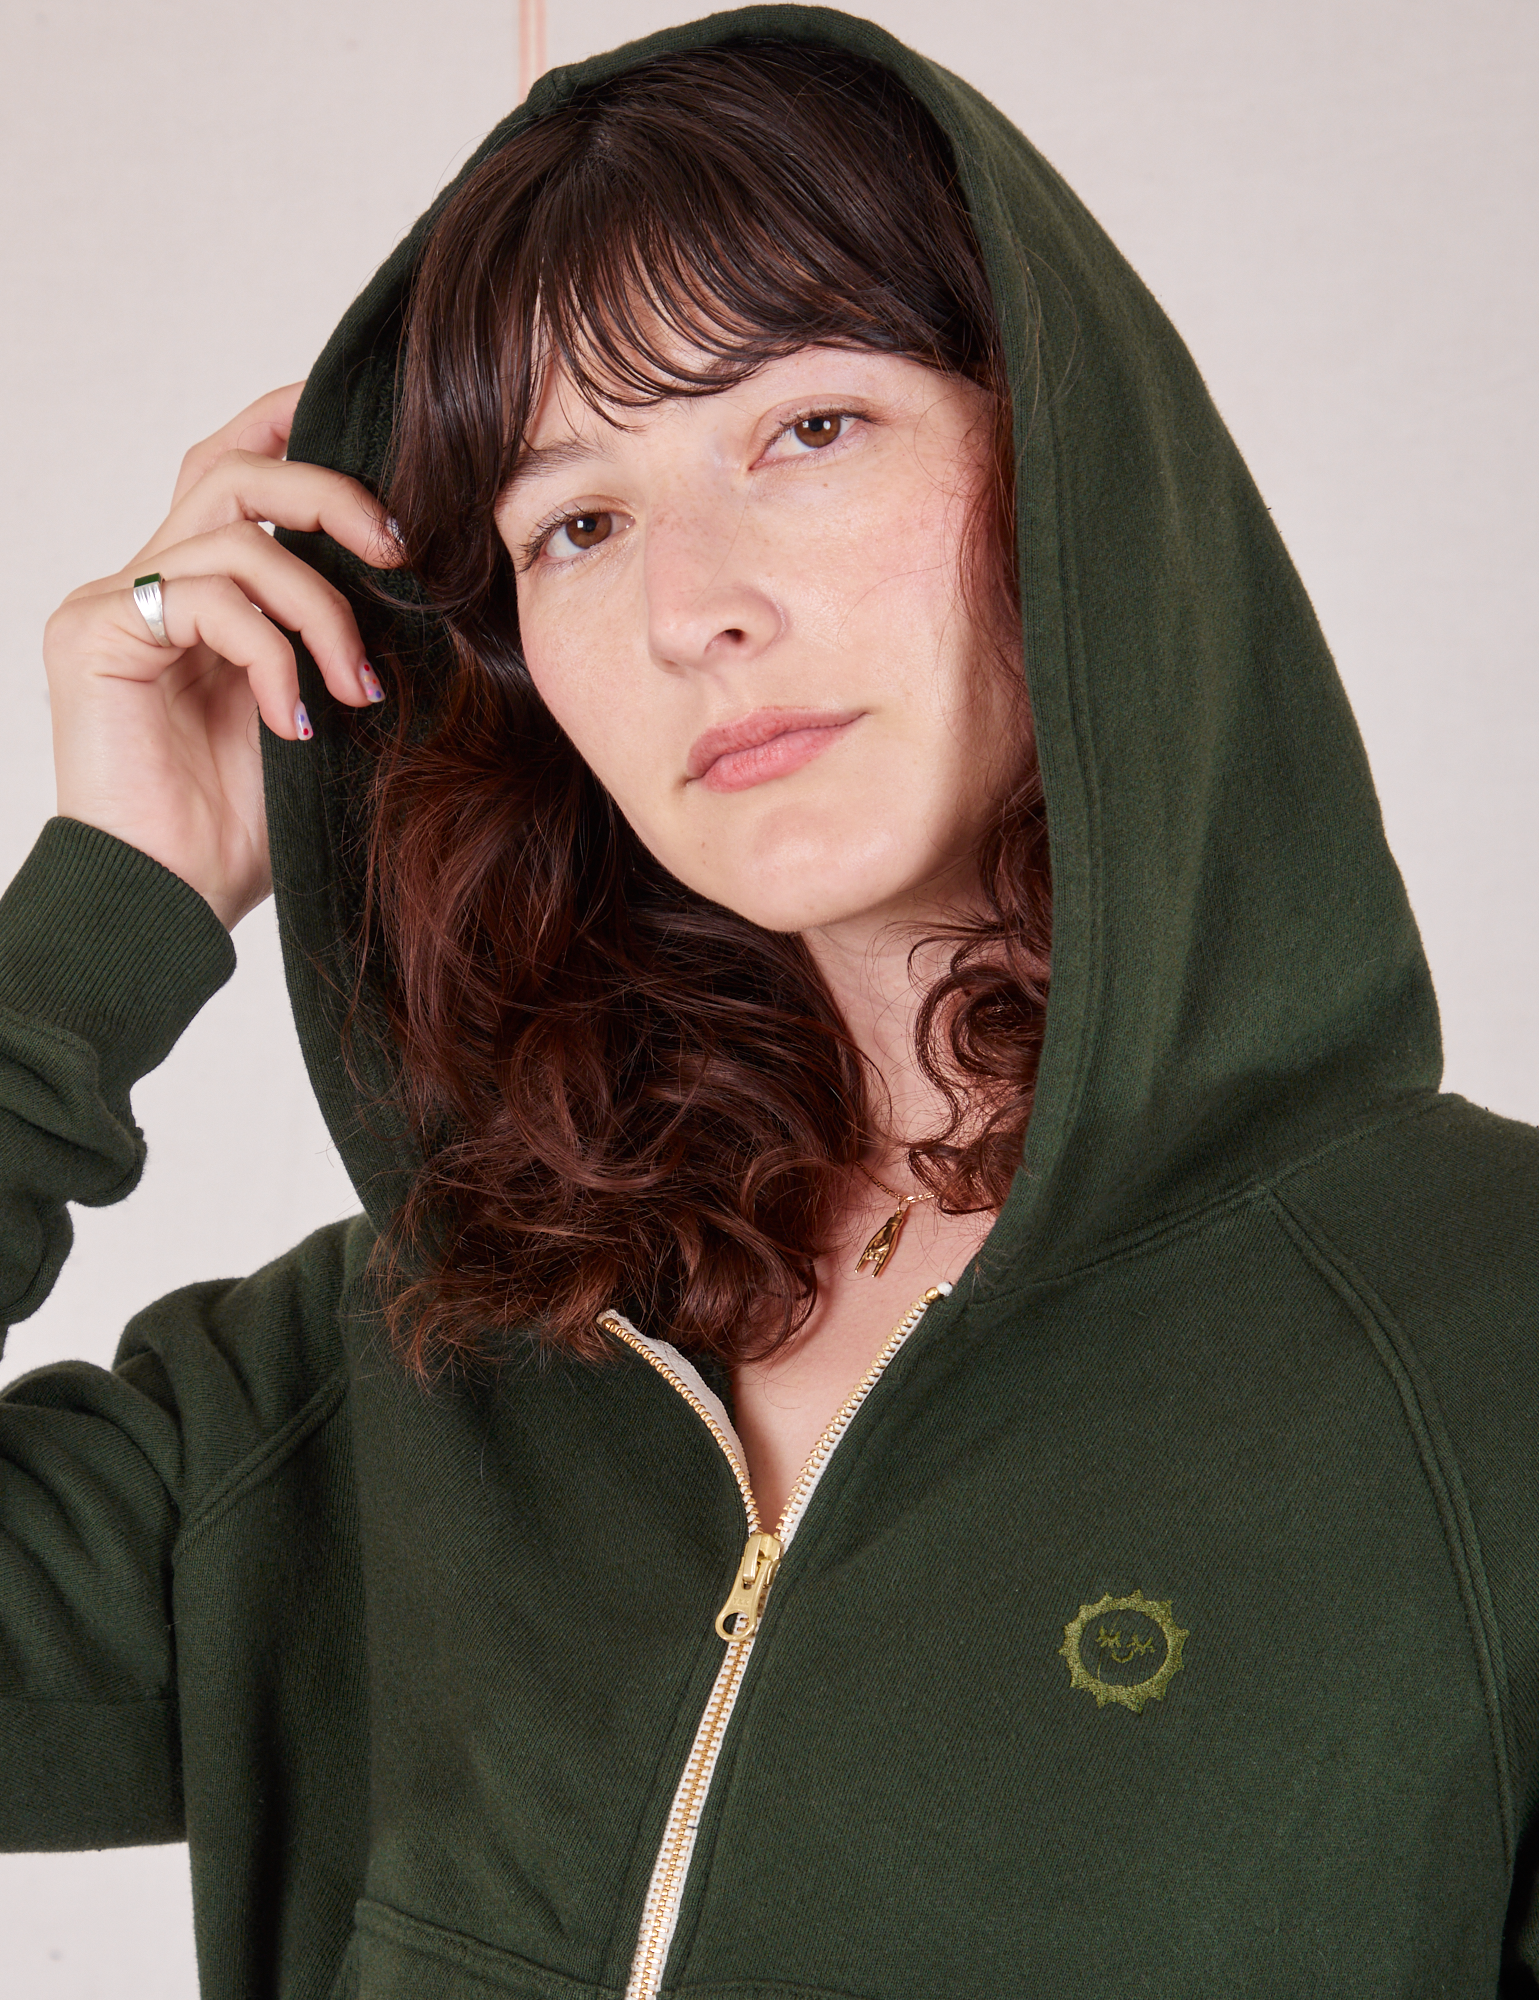 Alex is wearing Cropped Zip Hoodie in Swamp Green with the hood up